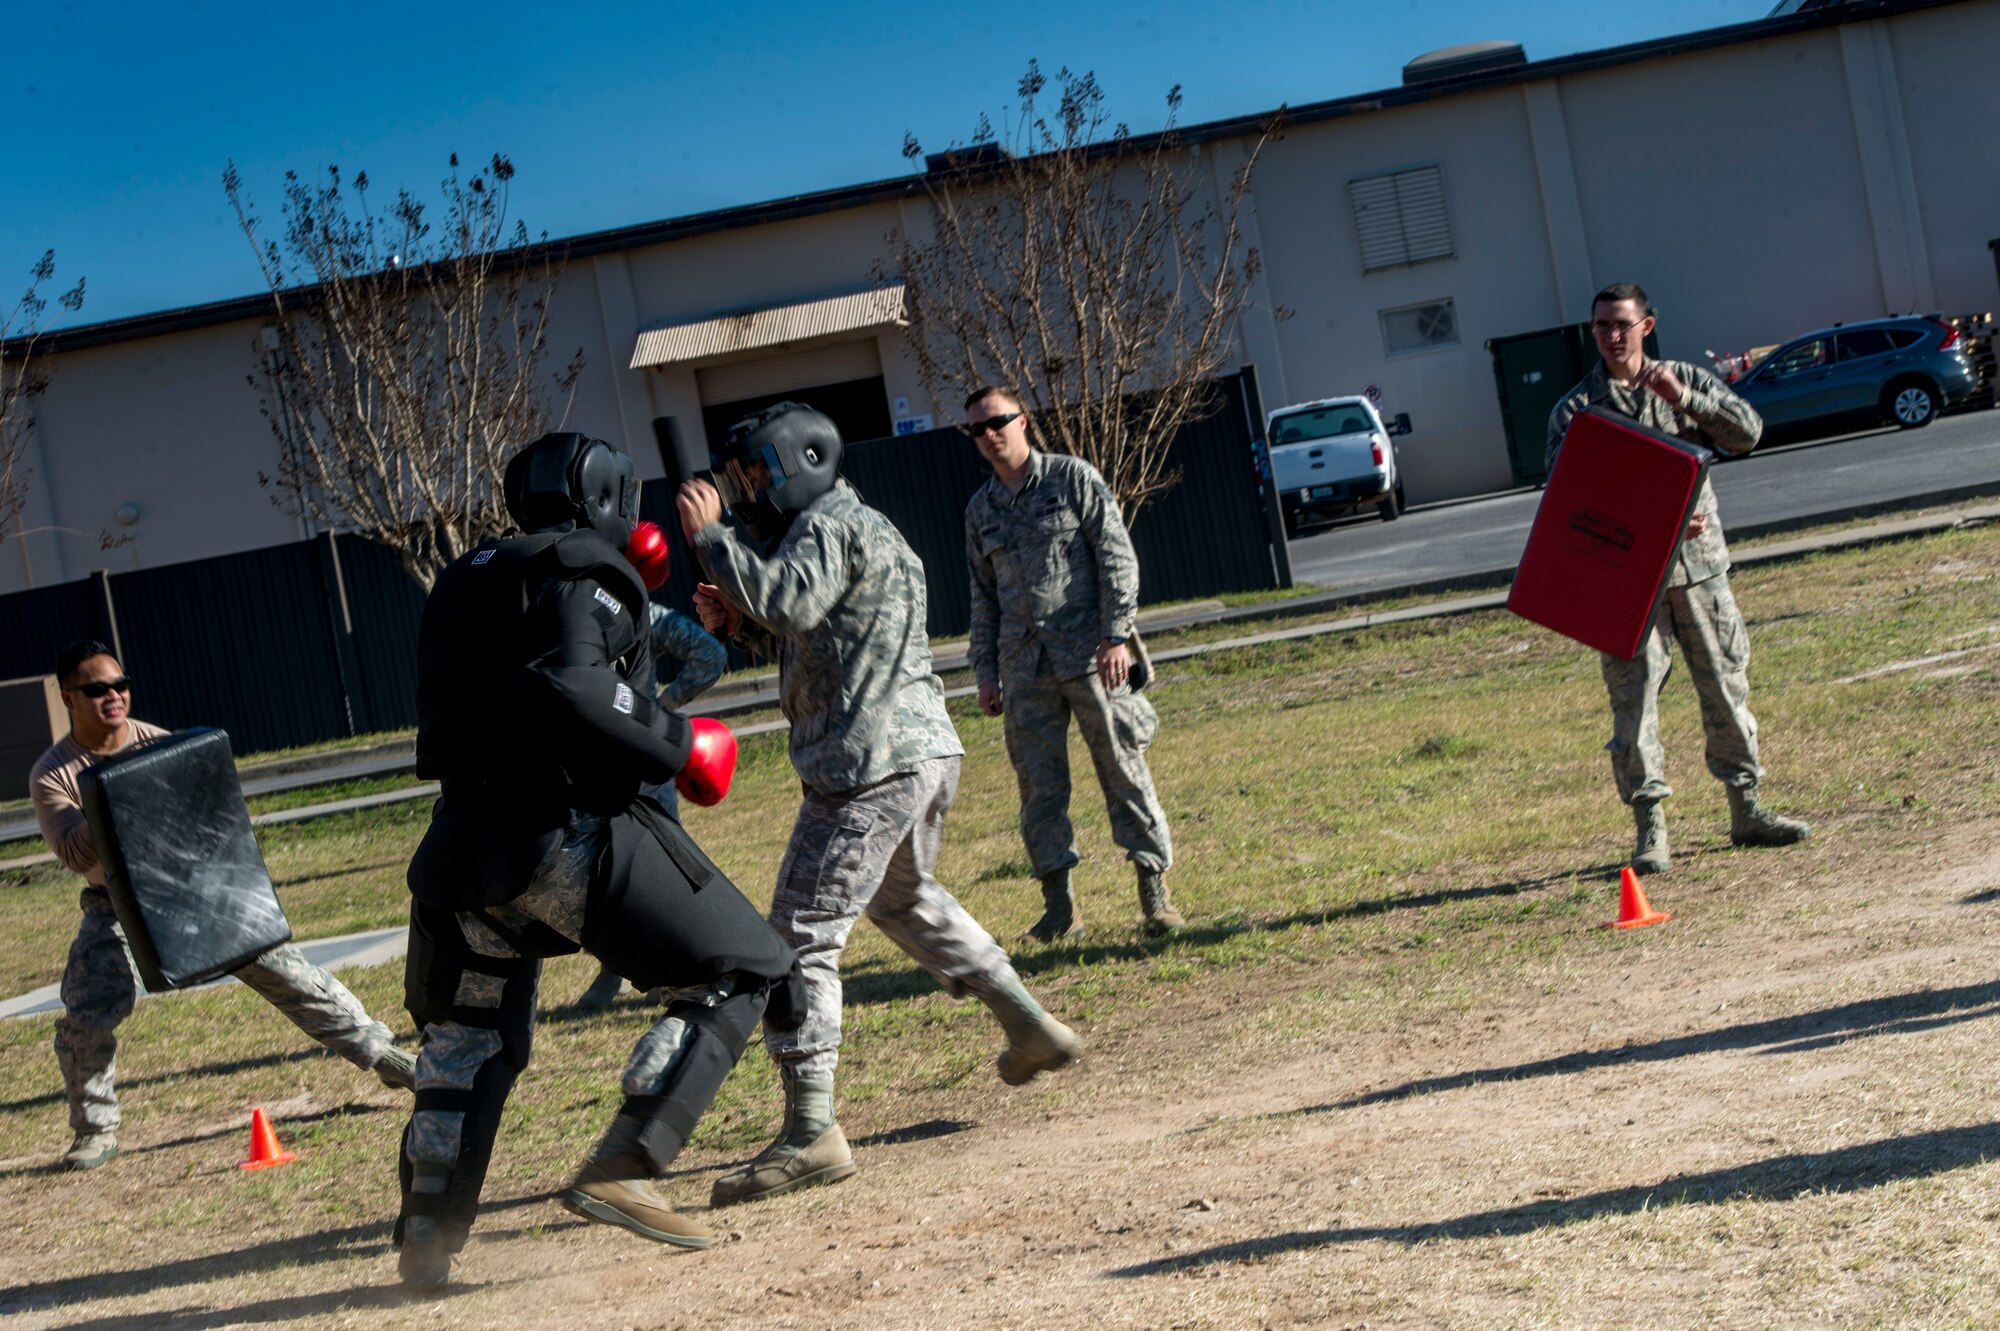 Airmen with the 1st Special Operations Security Forces Squadron practice their baton skills during baton training at Hurlburt Field, Fla., Feb. 10, 2016. Security Forces personnel participate in combat scenario exercises to gain real-world experience. (U.S. Air Force photo by Senior Airman Krystal M. Garrett)